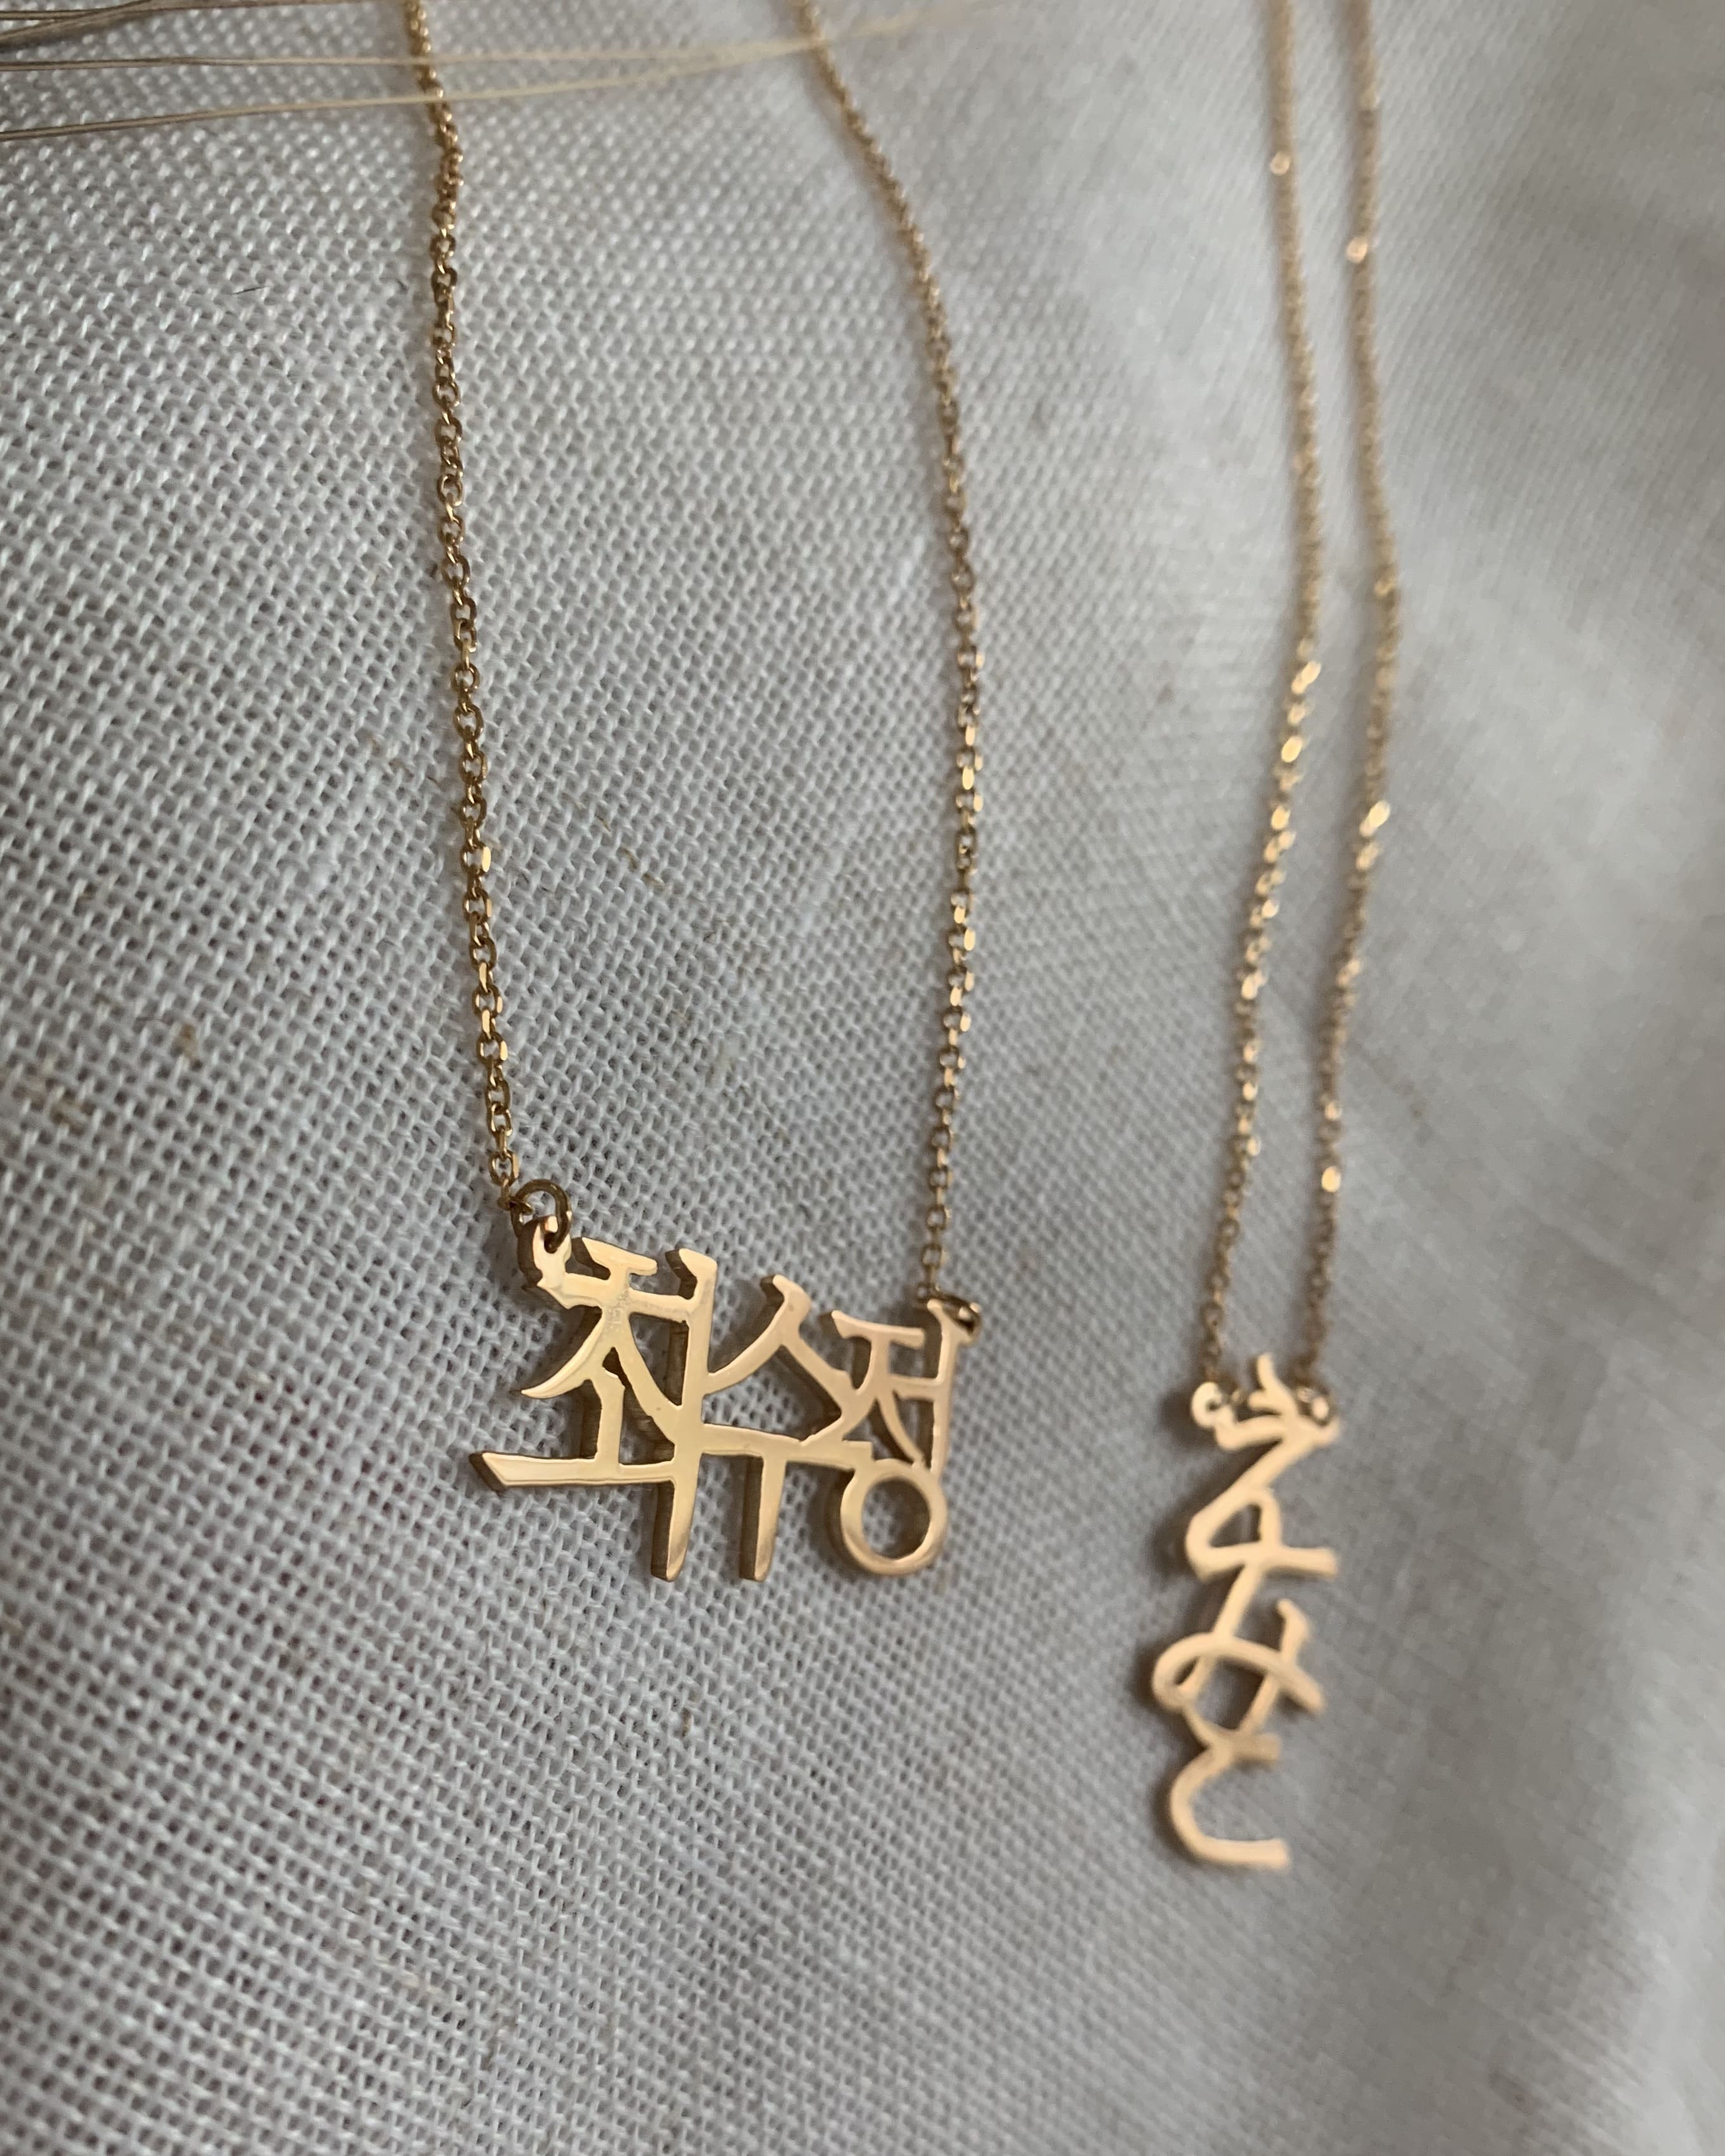 Japanese/Chinese/Korean Calligraphy Name Necklace